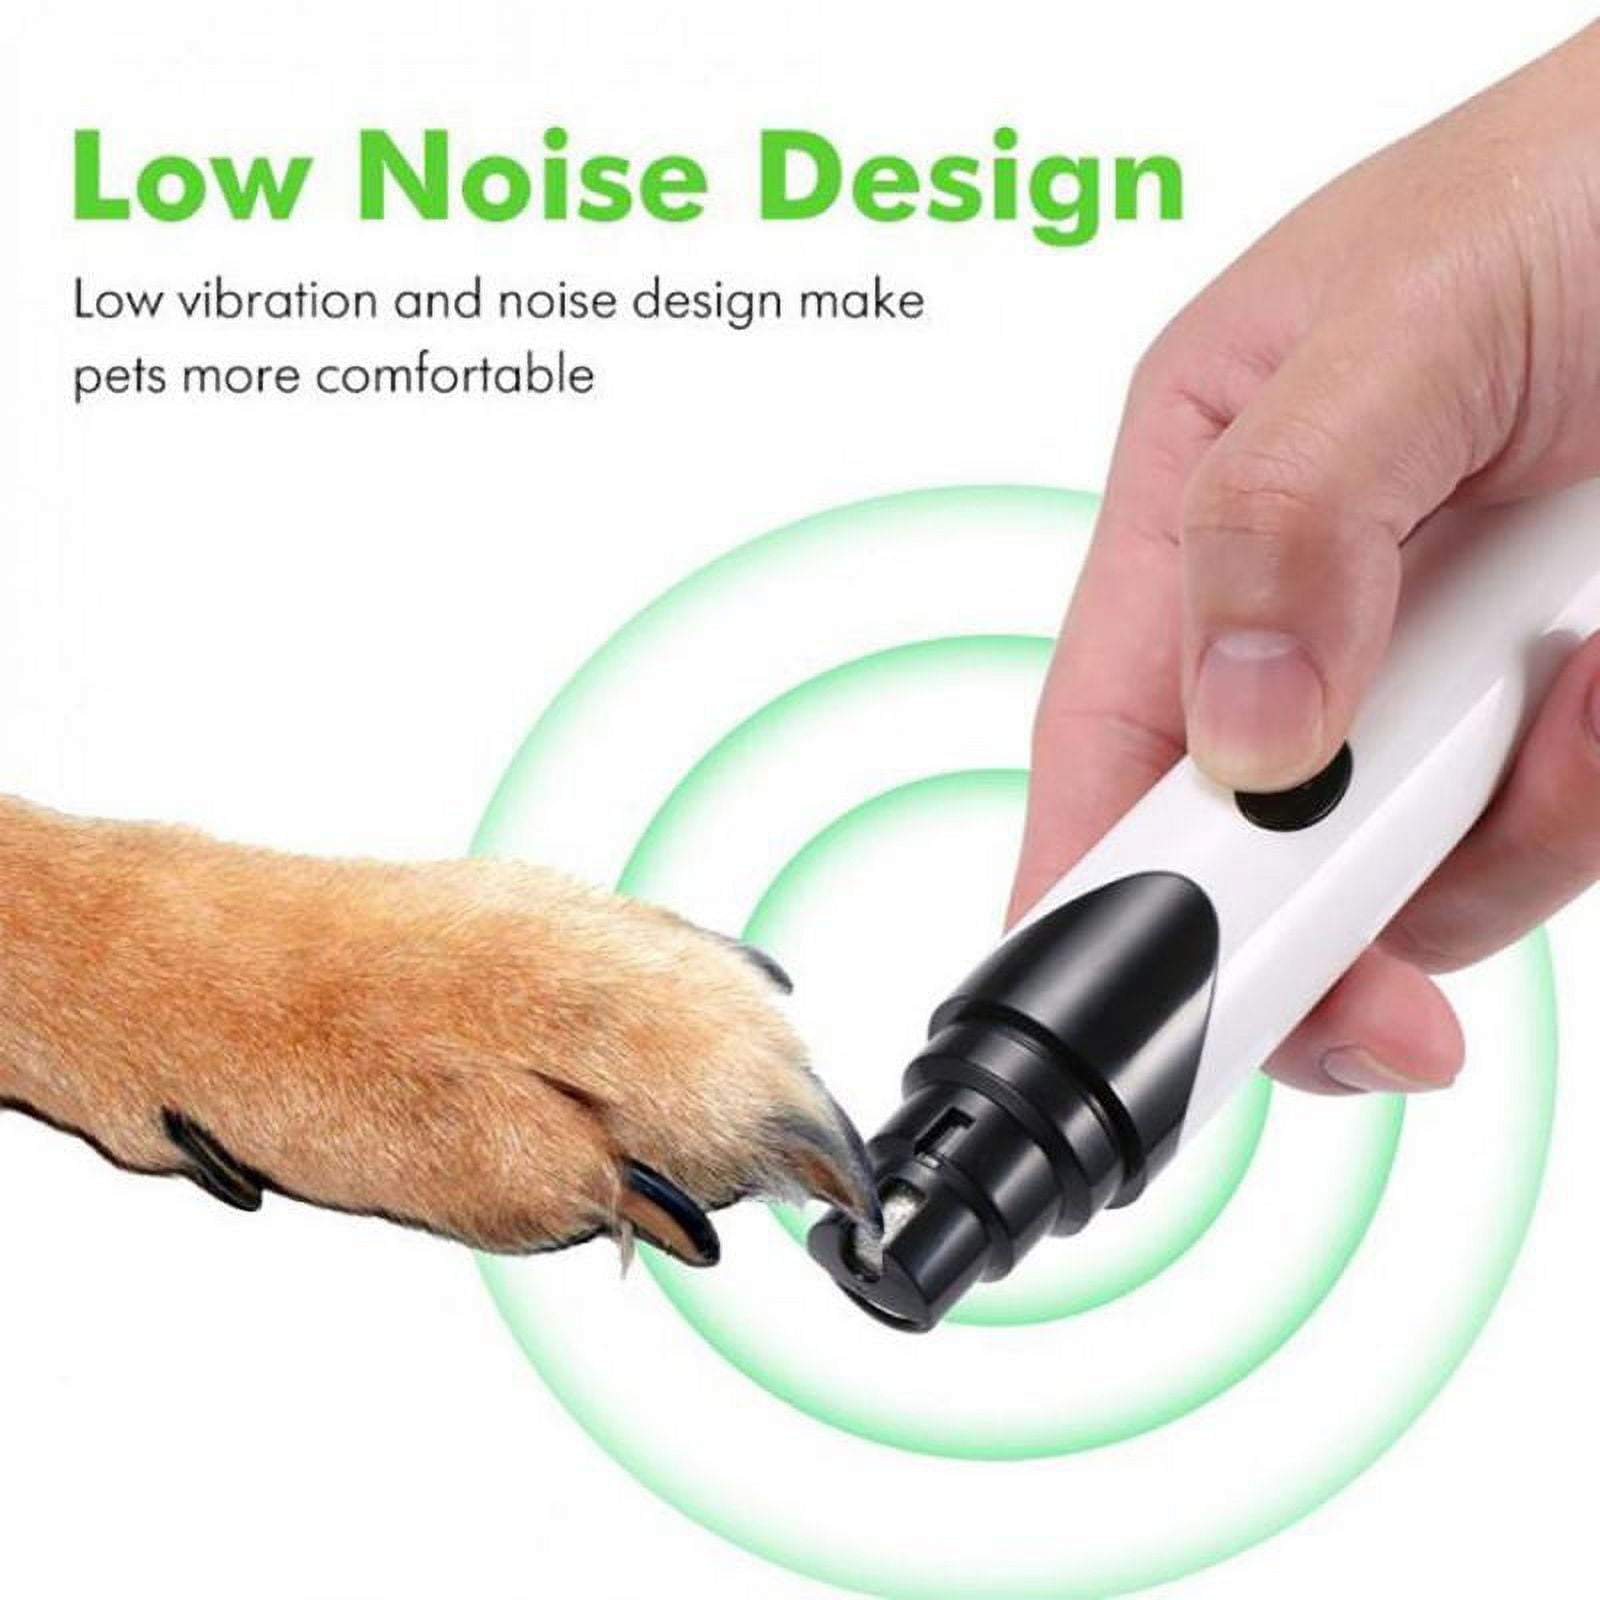 Ultra Quiet Dog Nail Grinder, Rechargeable Pet Nail Trimmer Clippers Claw  Care | Fruugo BH